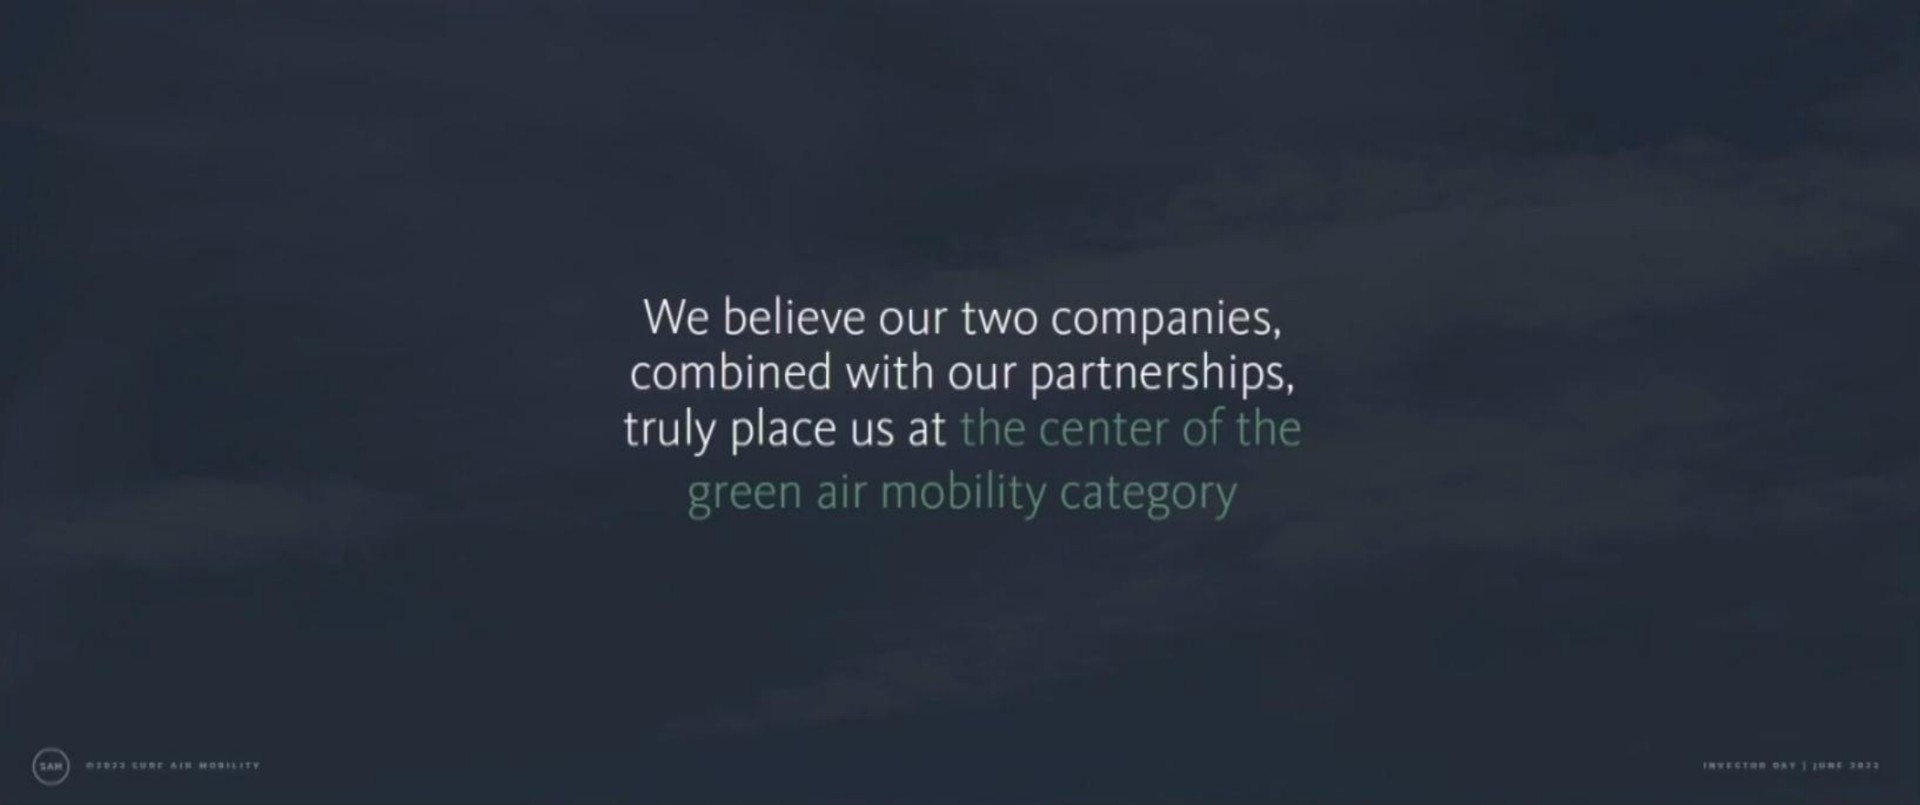 we believe our two companies combined with our partnerships truly place us at the center of the green air mobility category | Surf Air